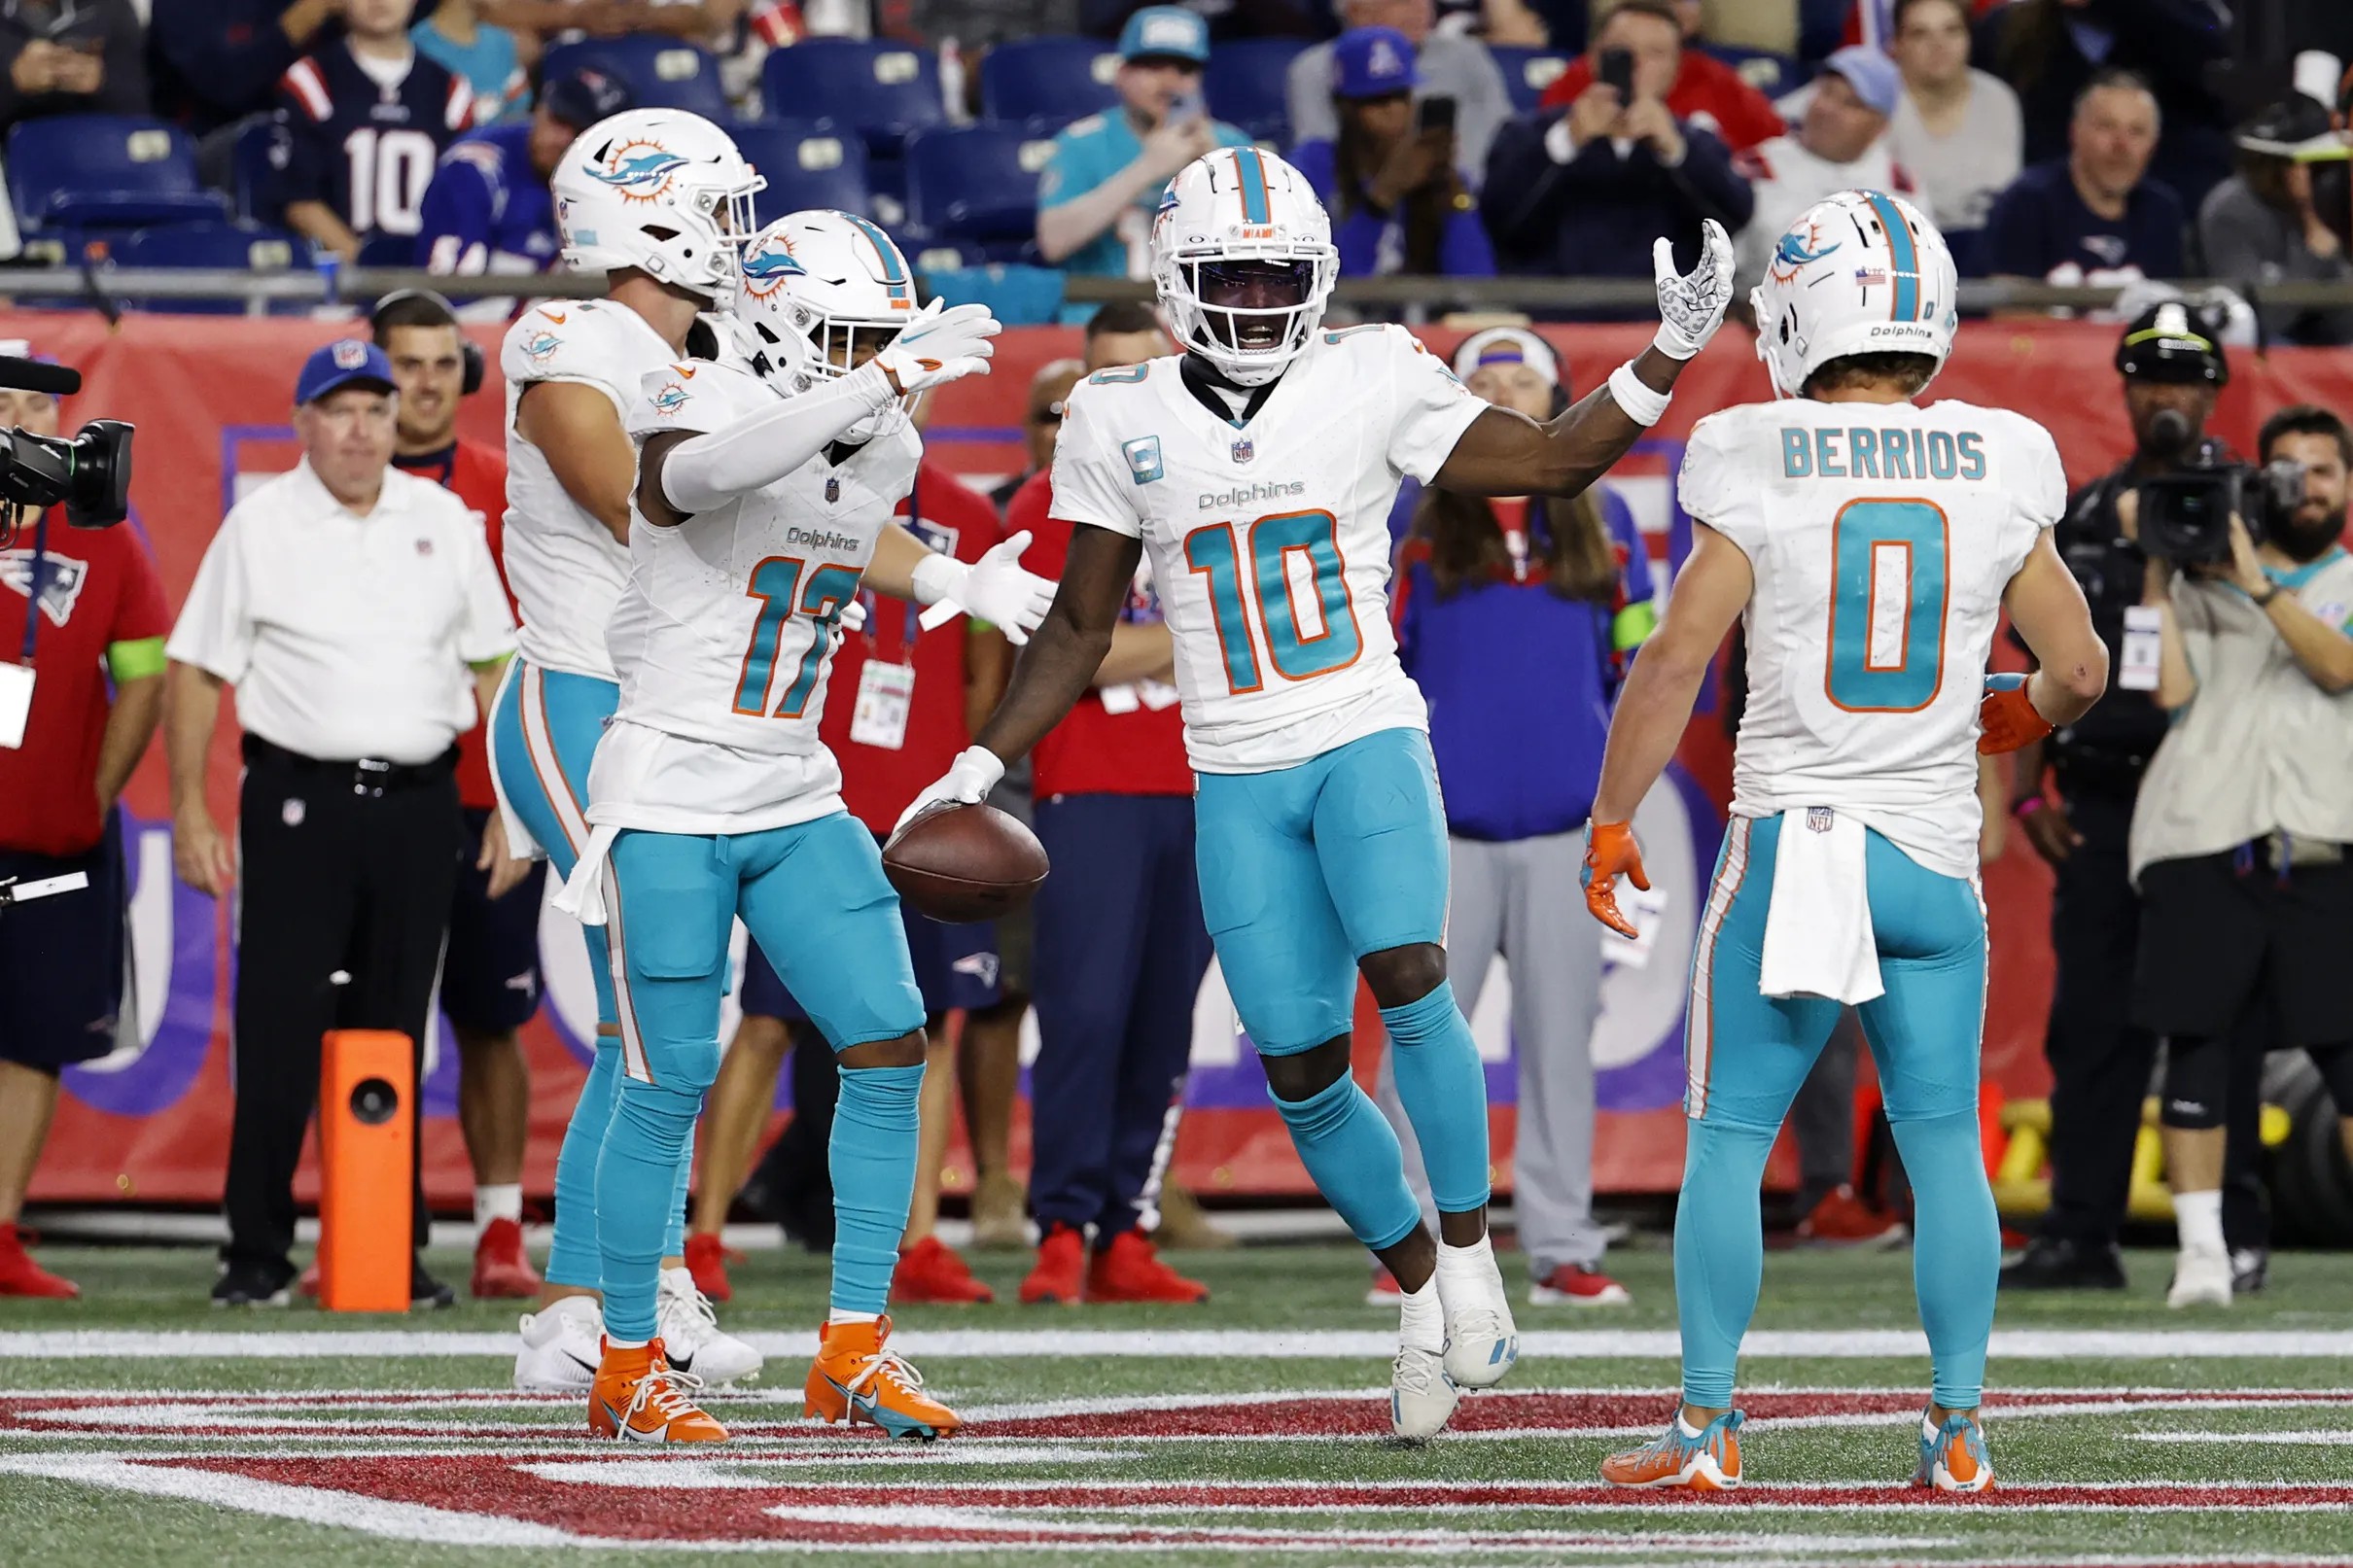 The Miami Dolphins are in the Super Bowl Sort of - The Phinsider